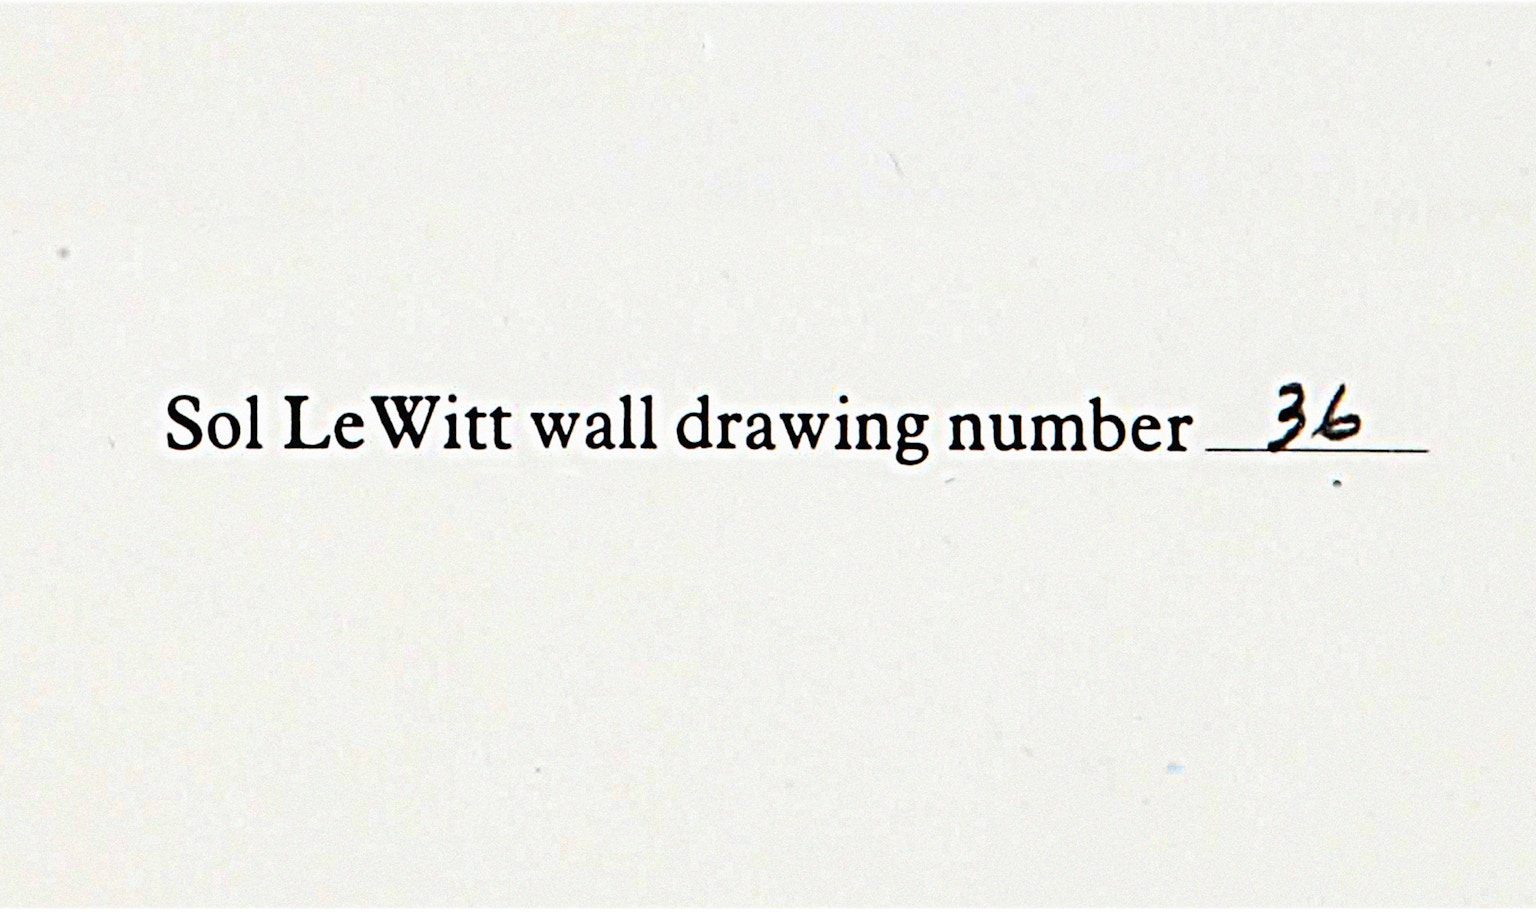 Home page 2 sol lewitt